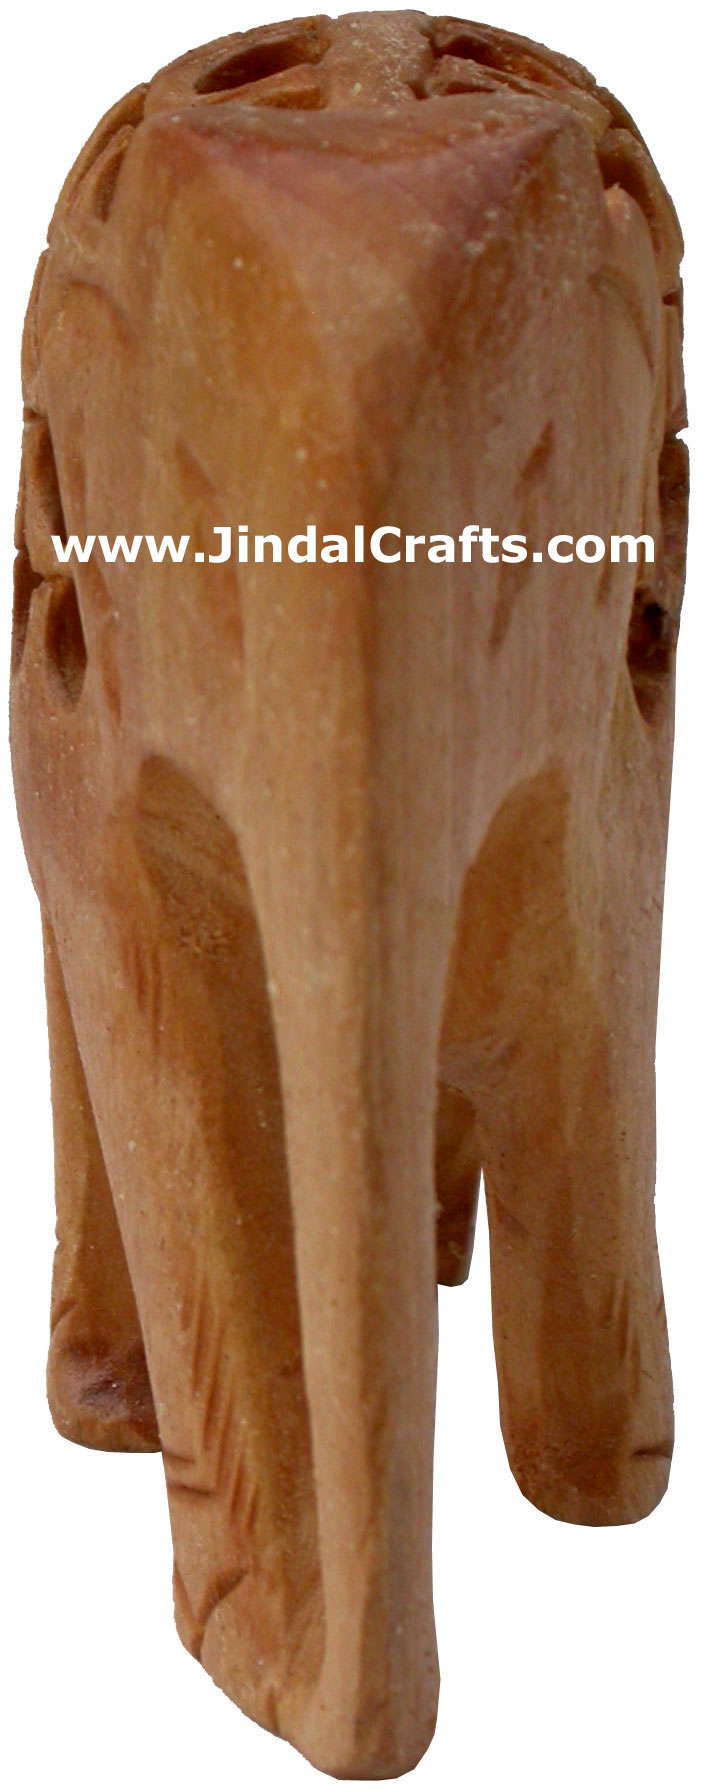 Baby Elephant - Hand Carved Wooden Animals Figures Art